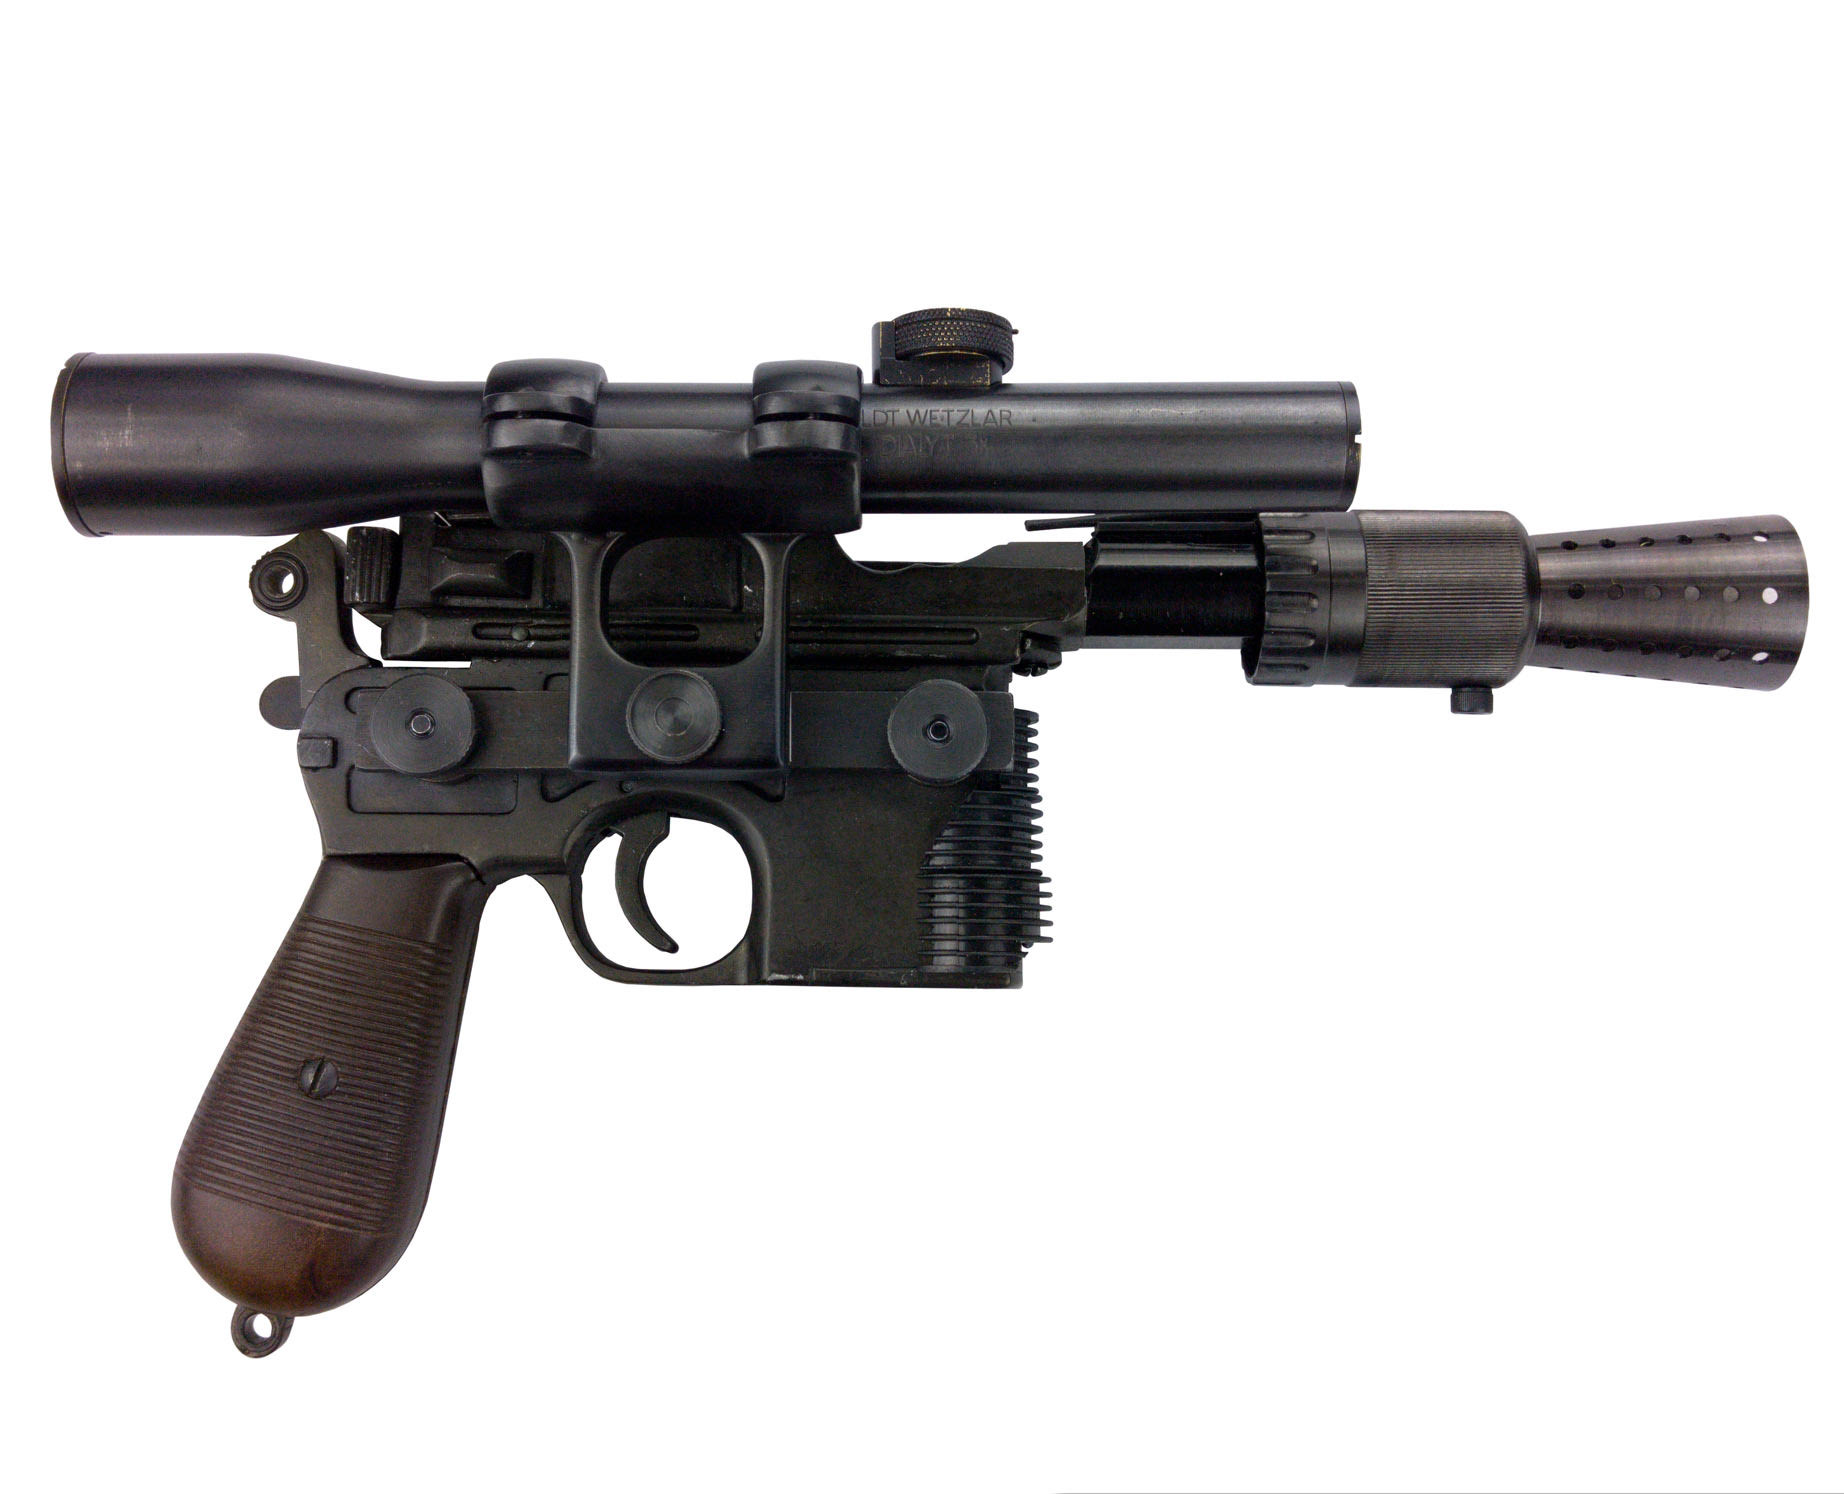 This May Be The Most Accurate Han Solo Blaster Replica Ever Created